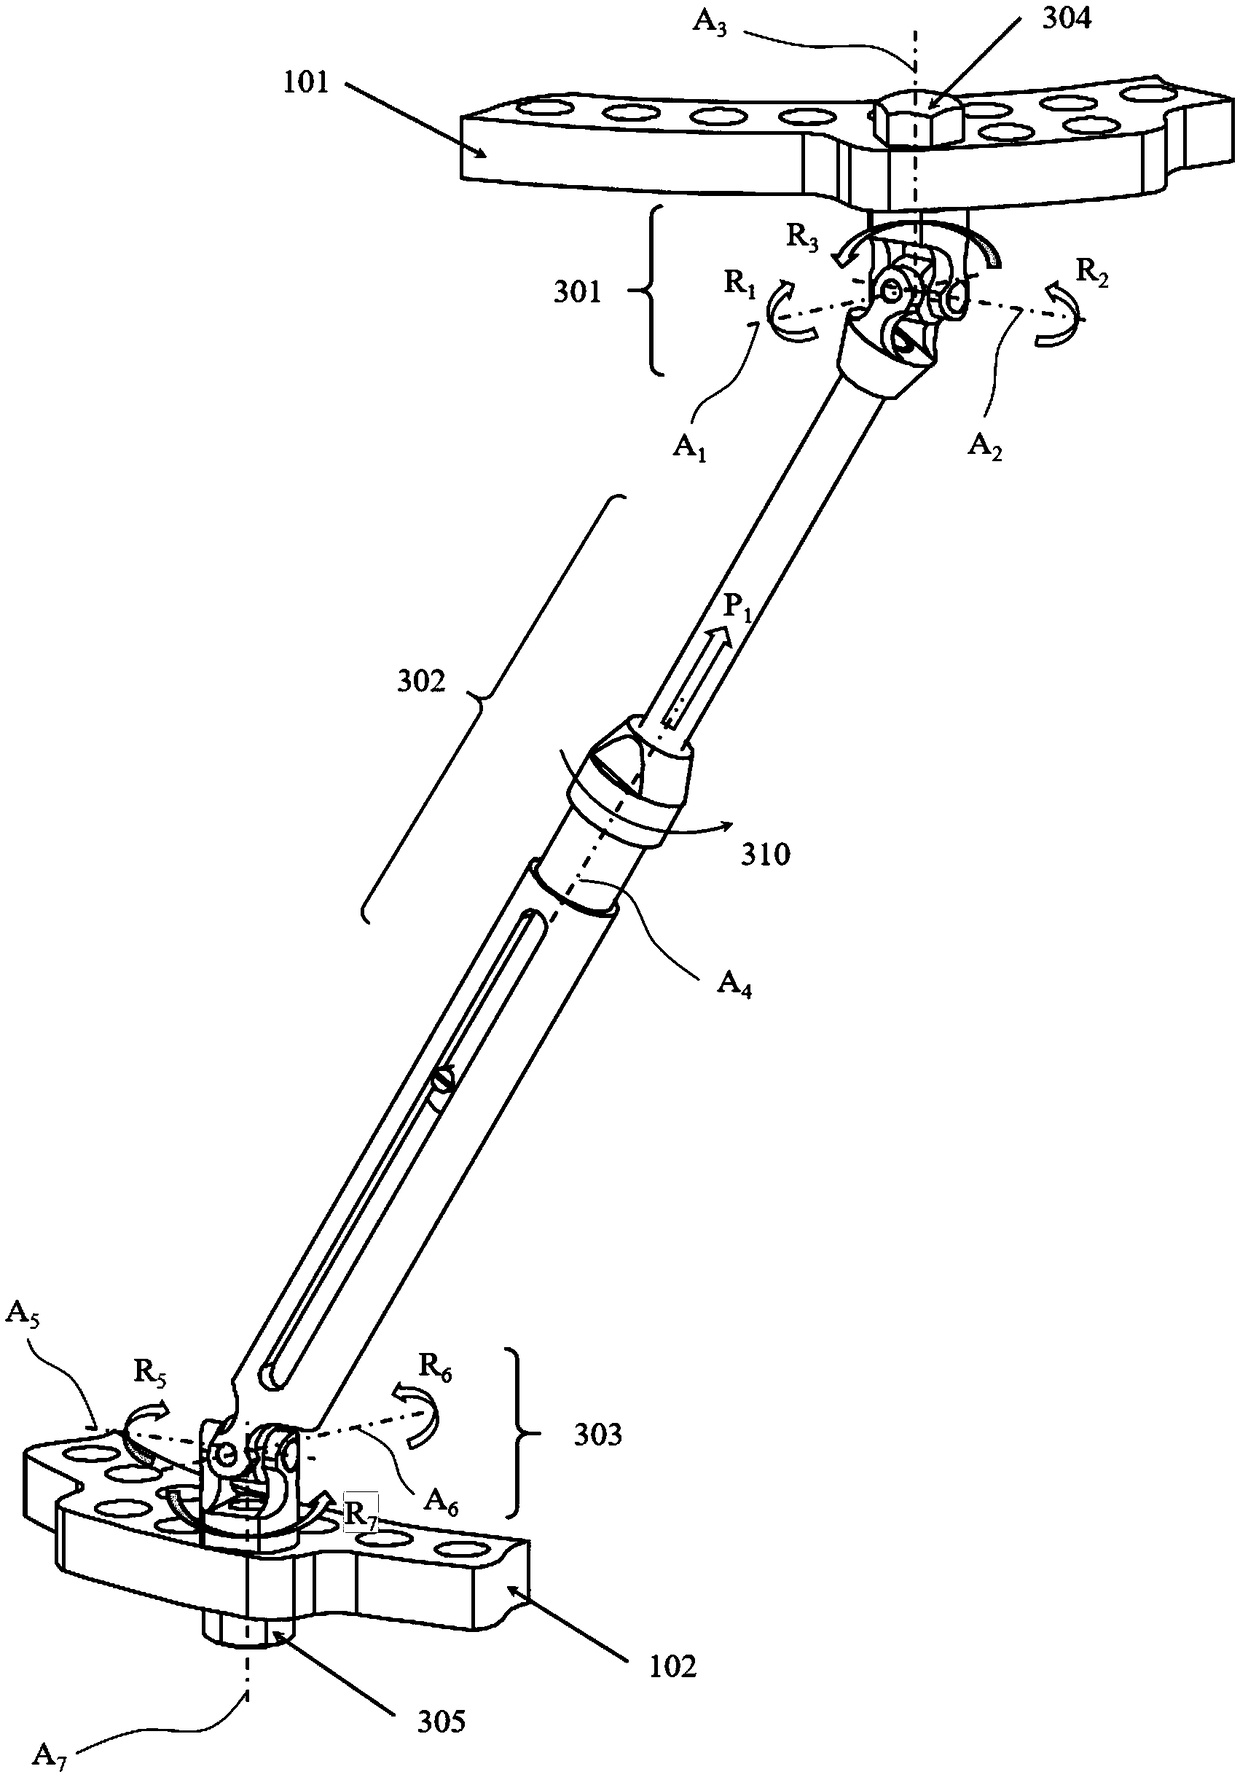 Fracture rehabilitation evaluation method based on six-axis parallel external bone fixation device